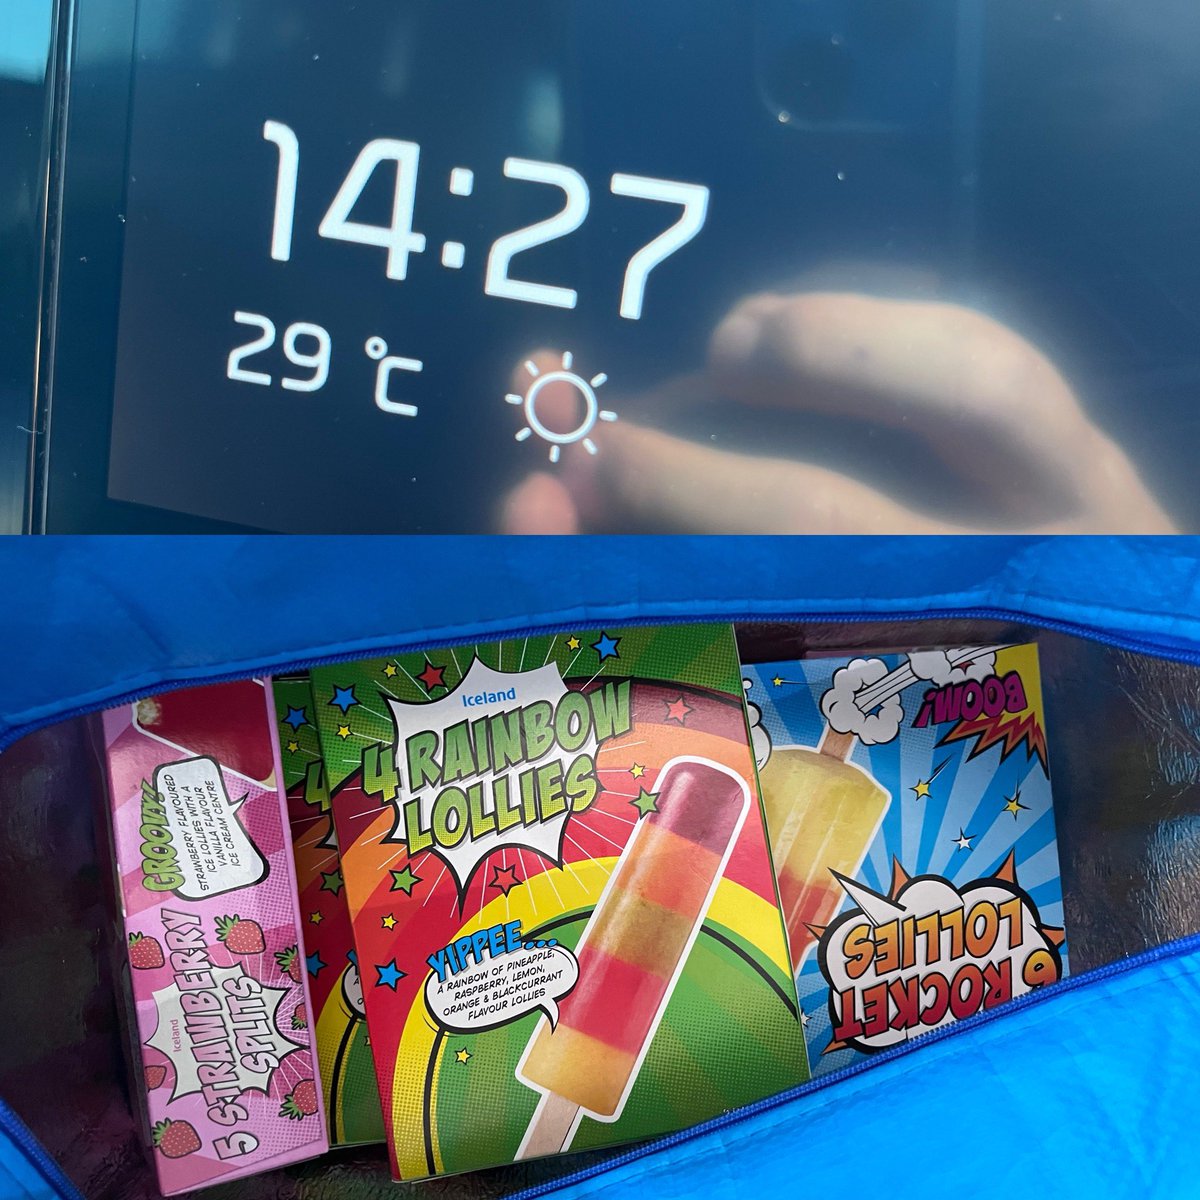 Only 1 thing for working in this weather… Ice lollies purchased for my amazing team, which went down a treat in briefing! Even brought a cool bag and ice packs for good measure 💪🍦 #Police #heatwaveuk